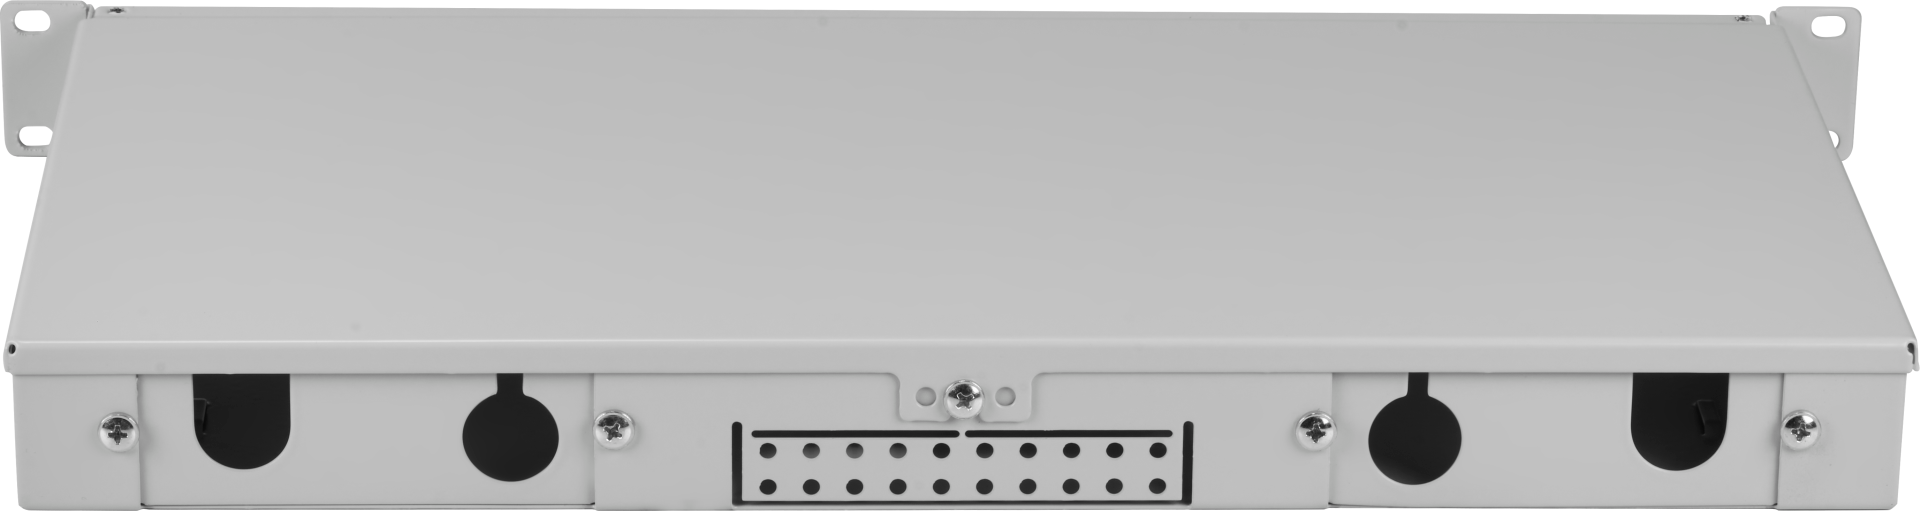 Splice box fixed 1U without front panel, unequipped, grey